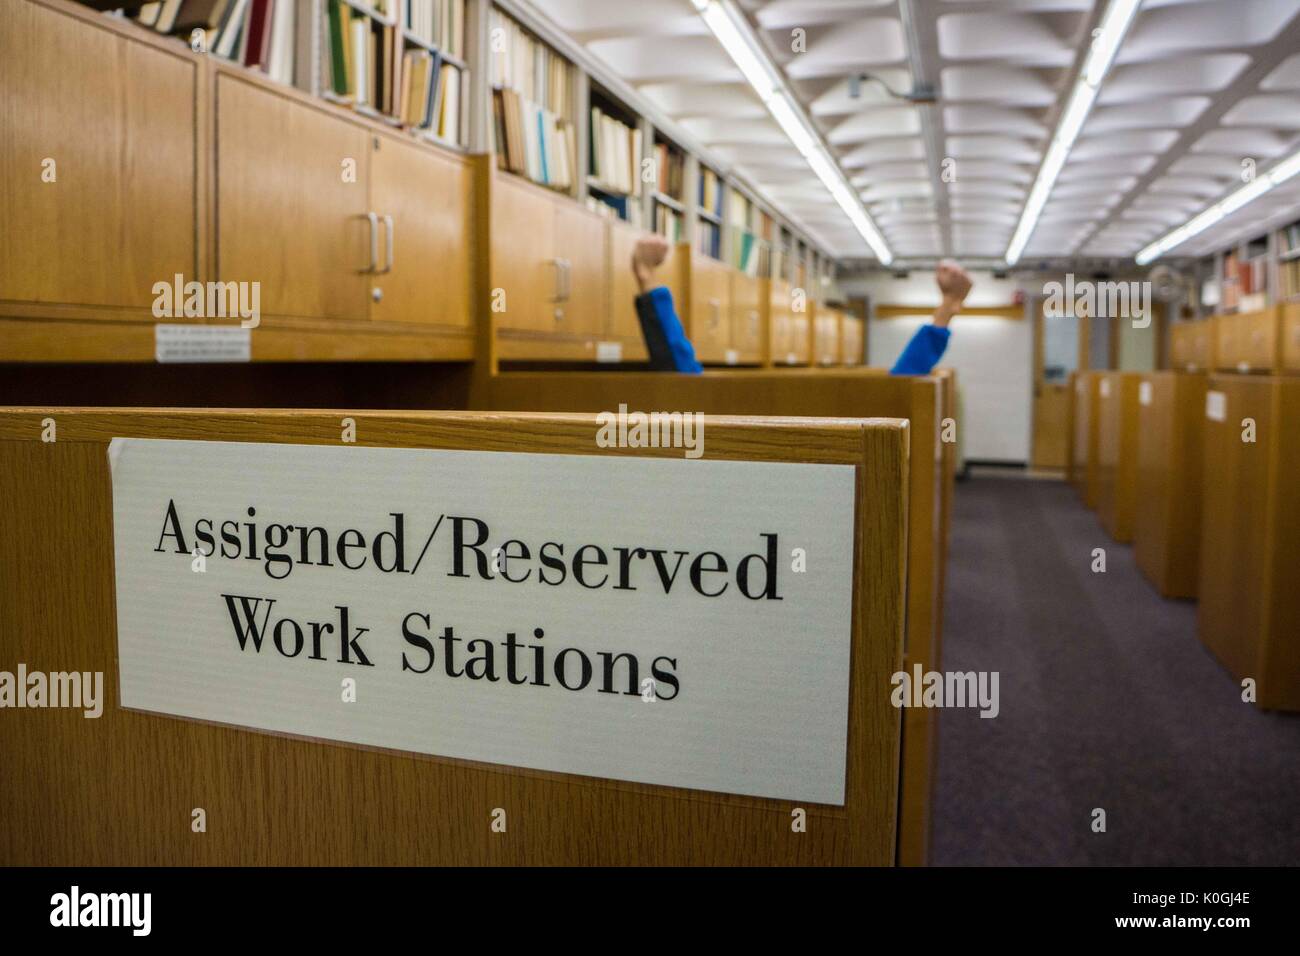 Assigned work stations, with one student raising his hands above the cubicle, in the Milton S. Eisenhower library on the Homewood campus of the Johns Hopkins University in Baltimore, Maryland, 2015. Courtesy Eric Chen. Stock Photo